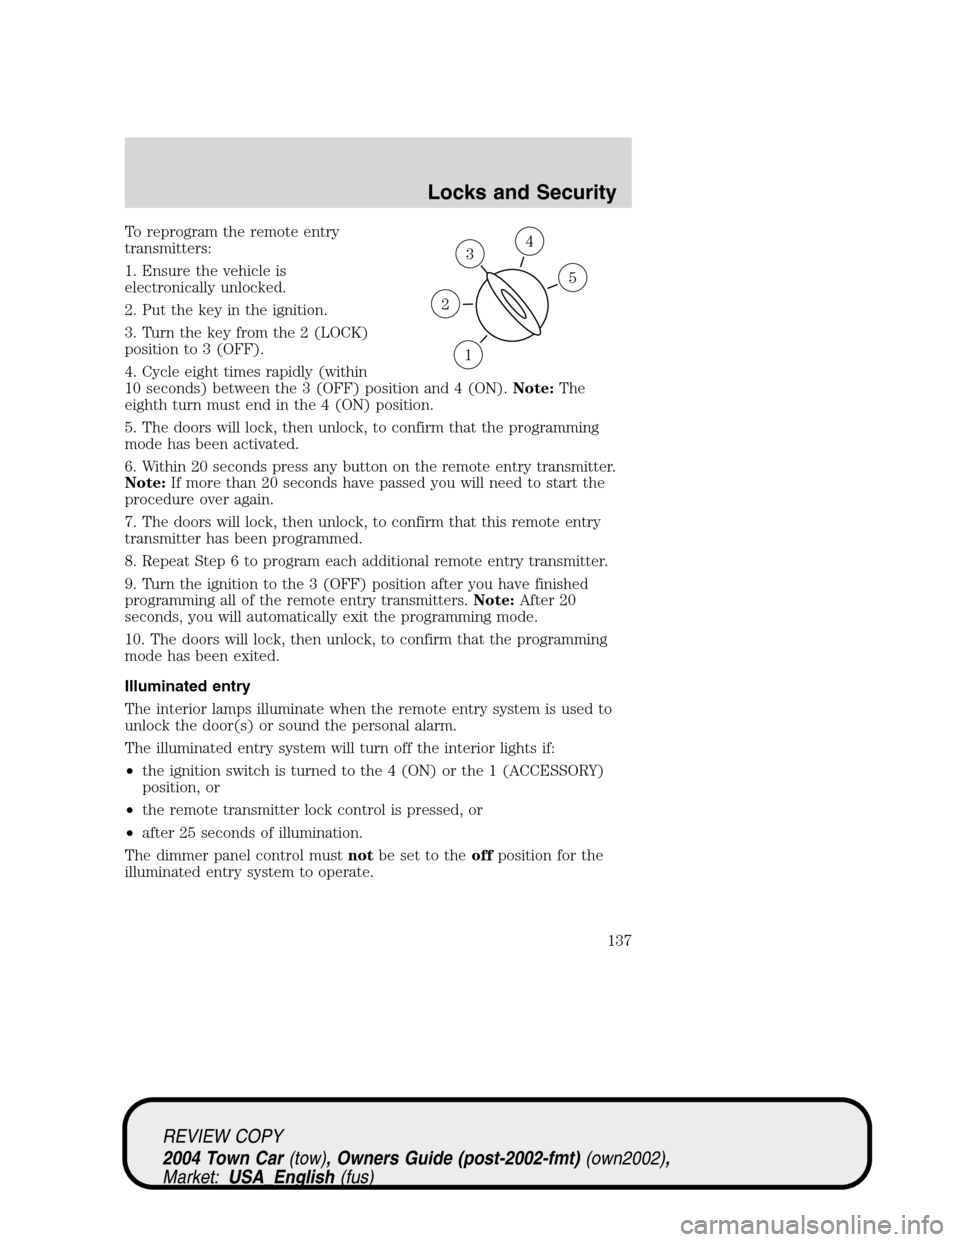 LINCOLN TOWN CAR 2004  Owners Manual To reprogram the remote entry
transmitters:
1. Ensure the vehicle is
electronically unlocked.
2. Put the key in the ignition.
3. Turn the key from the 2 (LOCK)
position to 3 (OFF).
4. Cycle eight time